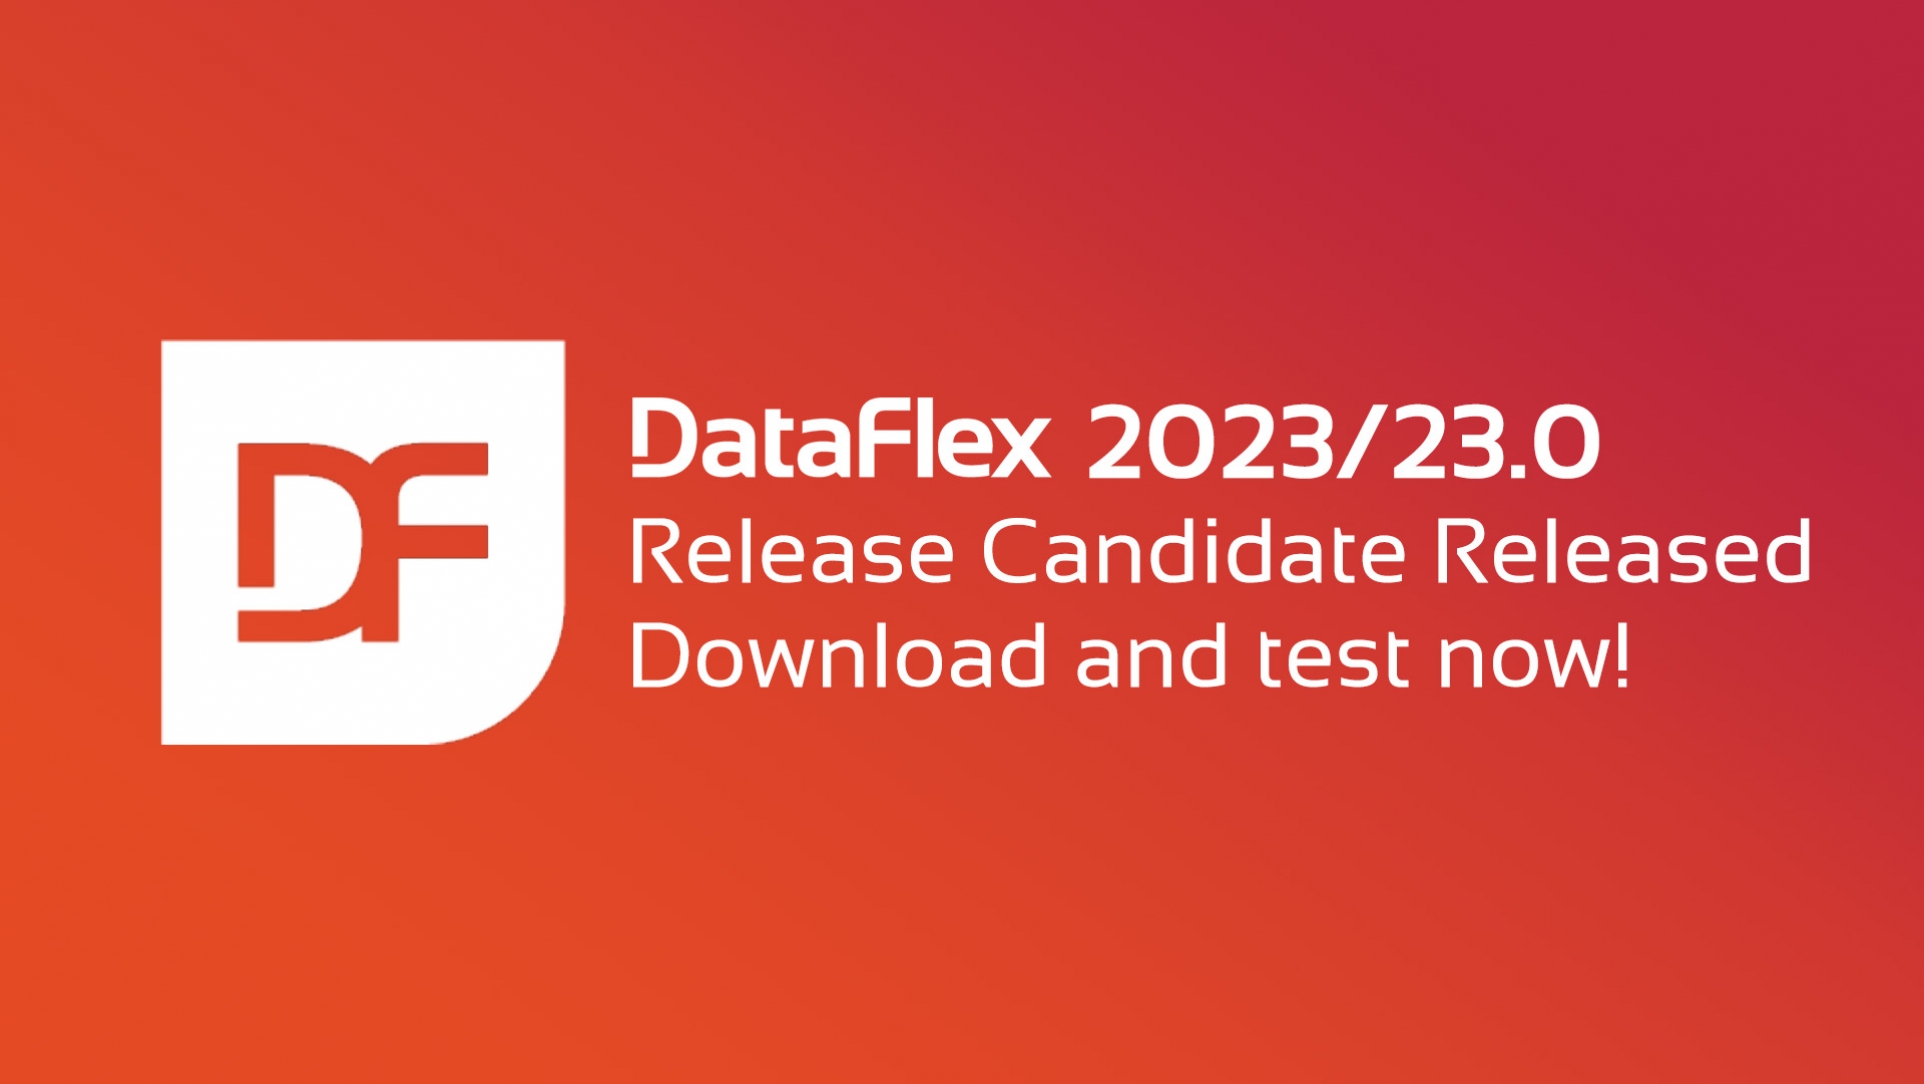 DataFlex 2023 Release Candidate Now Available!